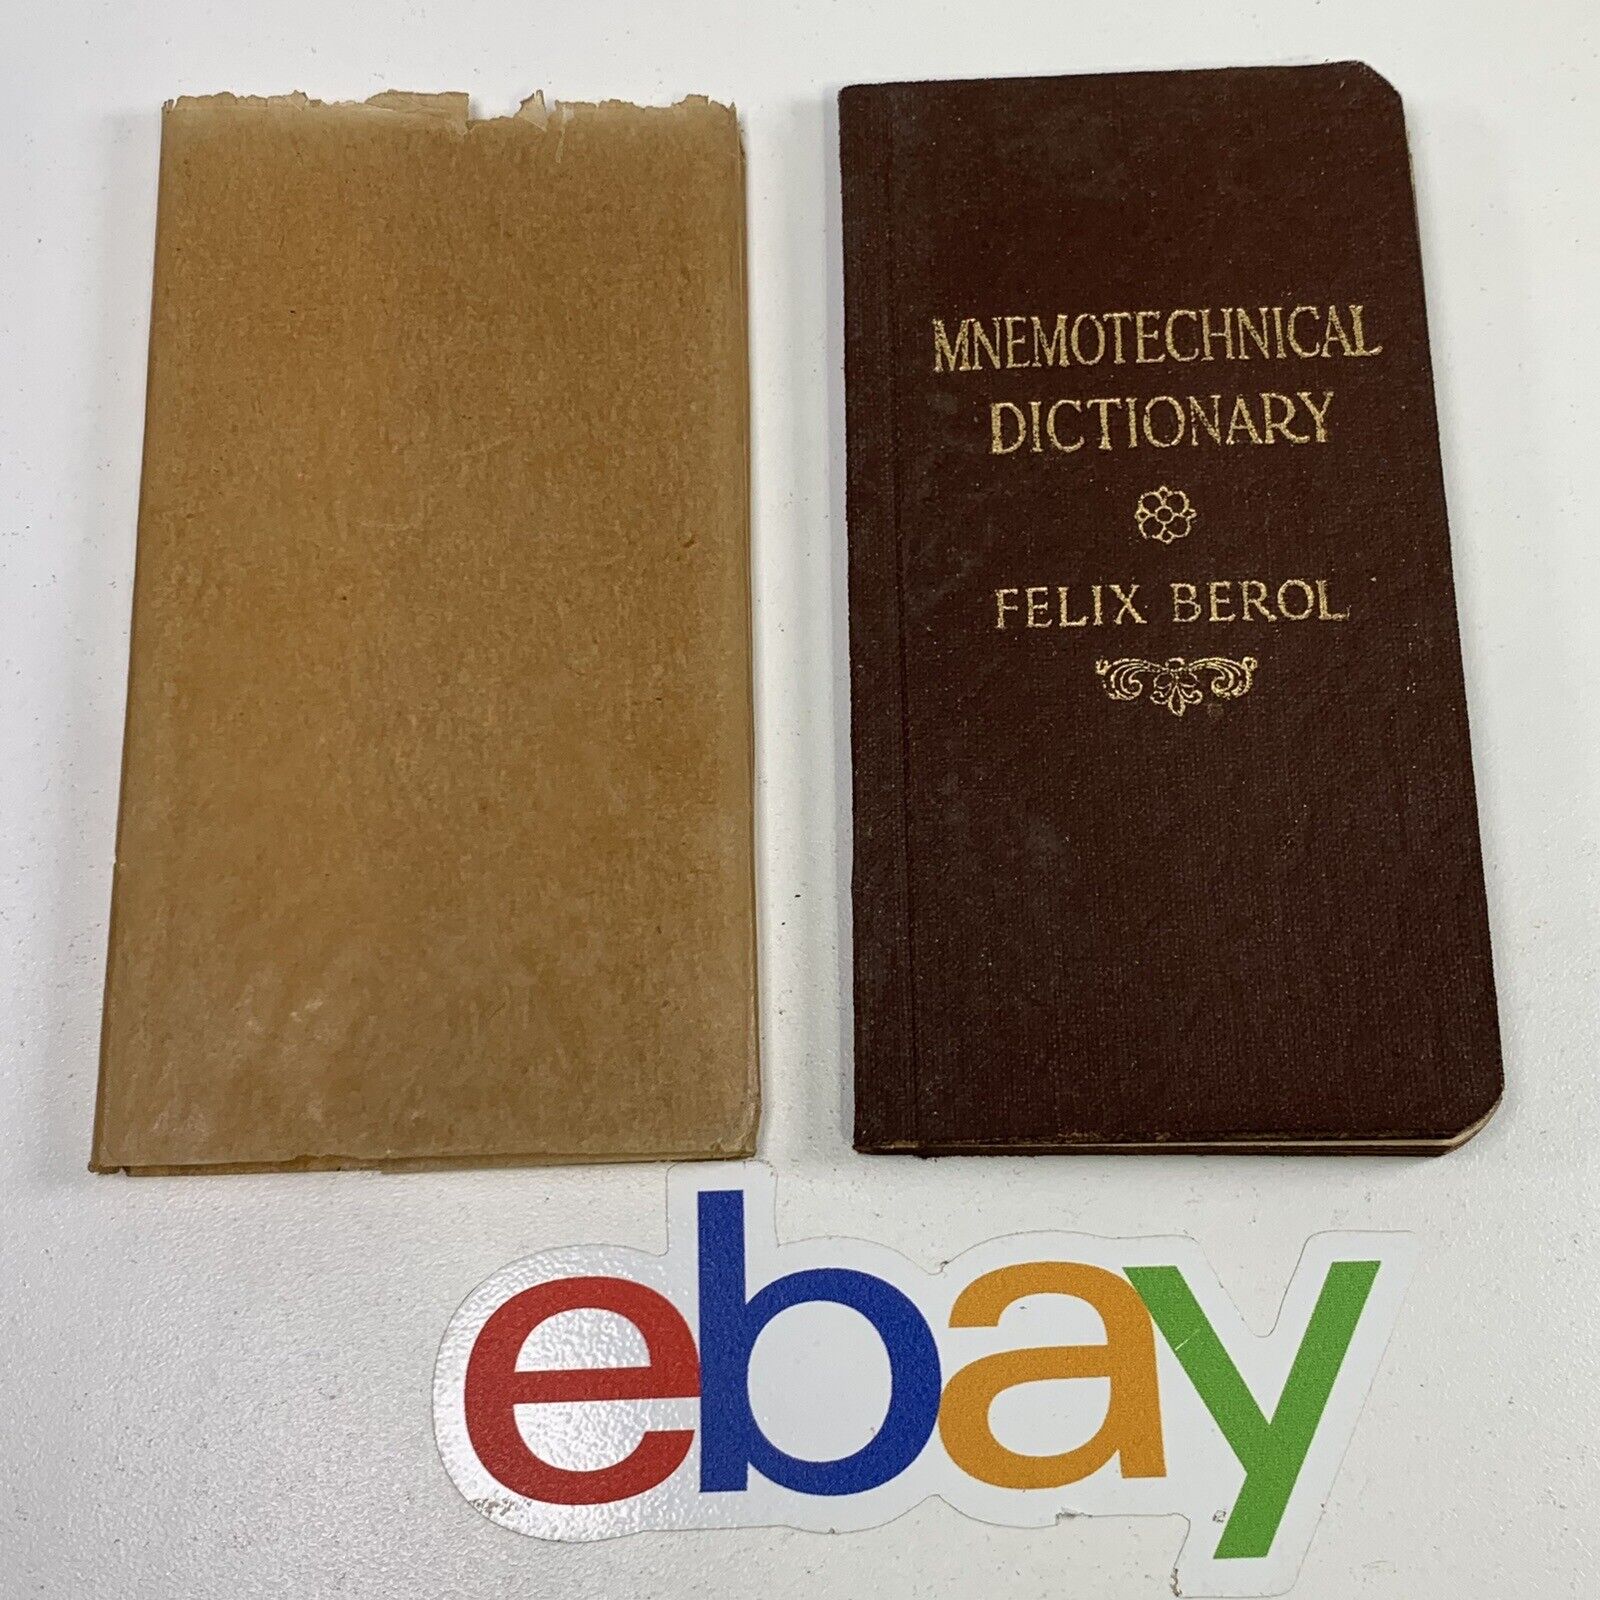 EXTREMELY RARE 1913 Mnemotechnical Dictionary by Felix Berol - 1st Edition A+